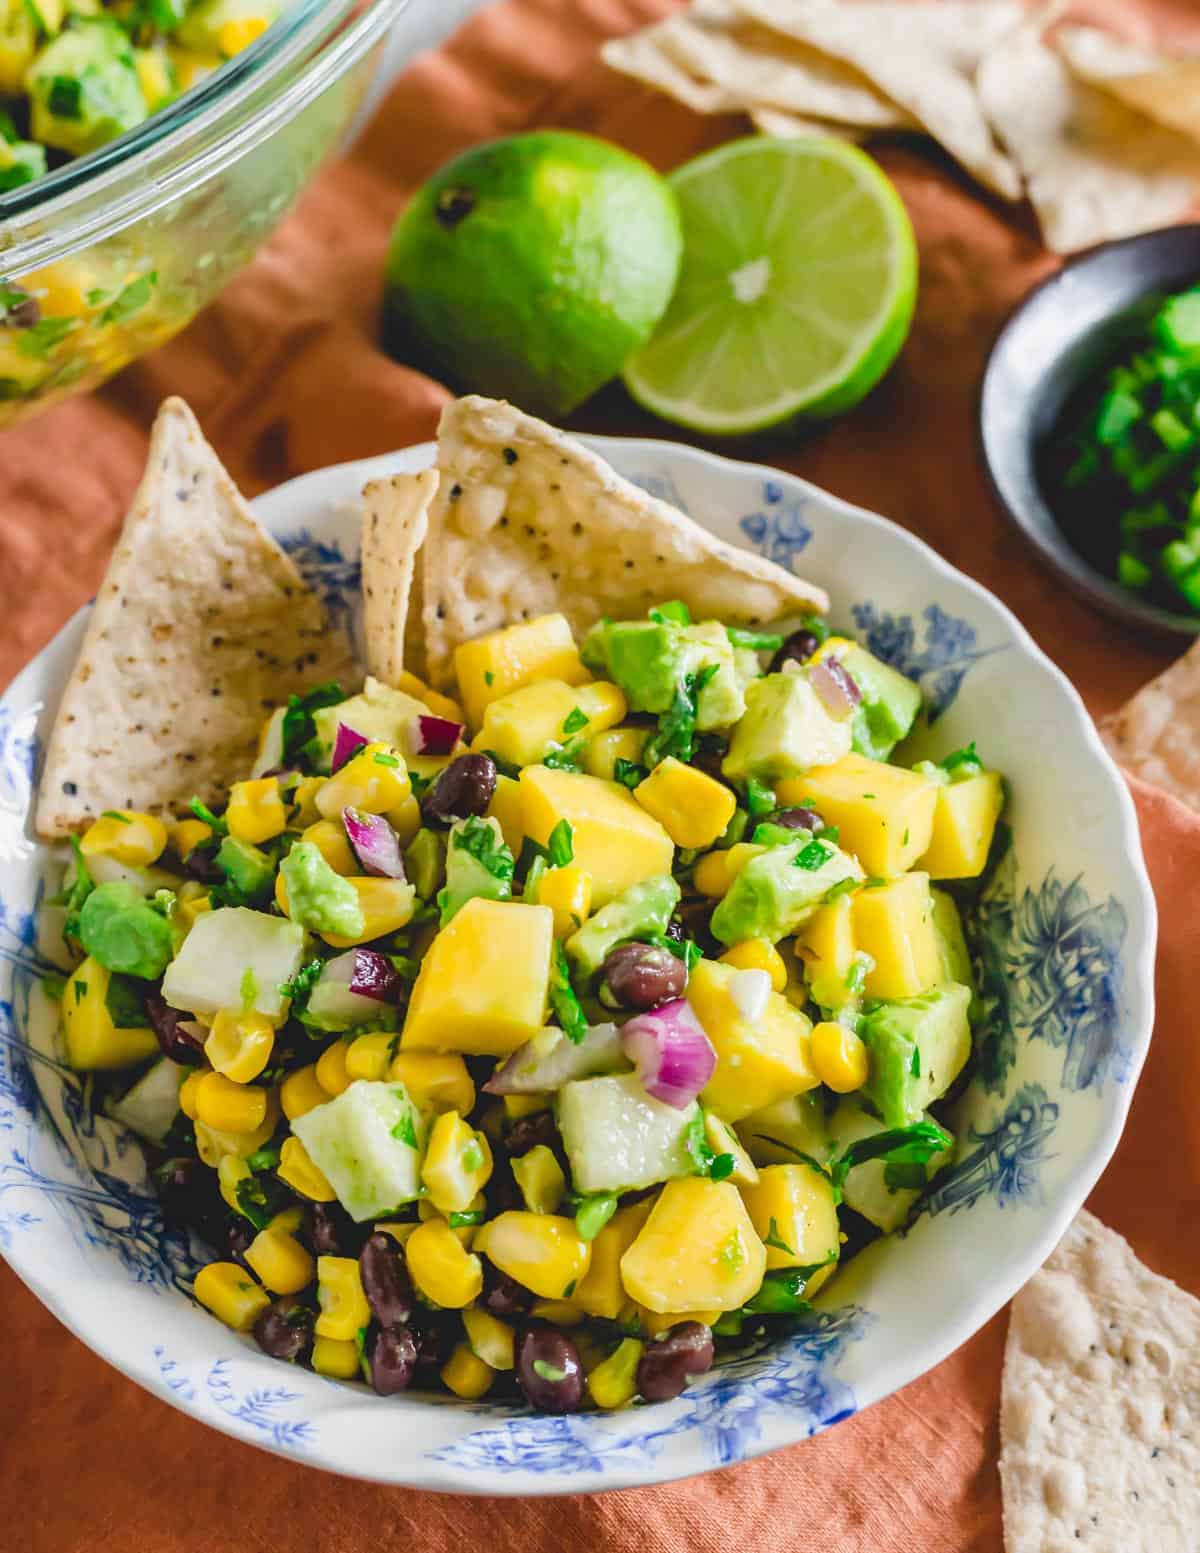 Mango, black beans, red onion, corn, jicama, avocado and cilantro salad in a bowl with tortilla chips.